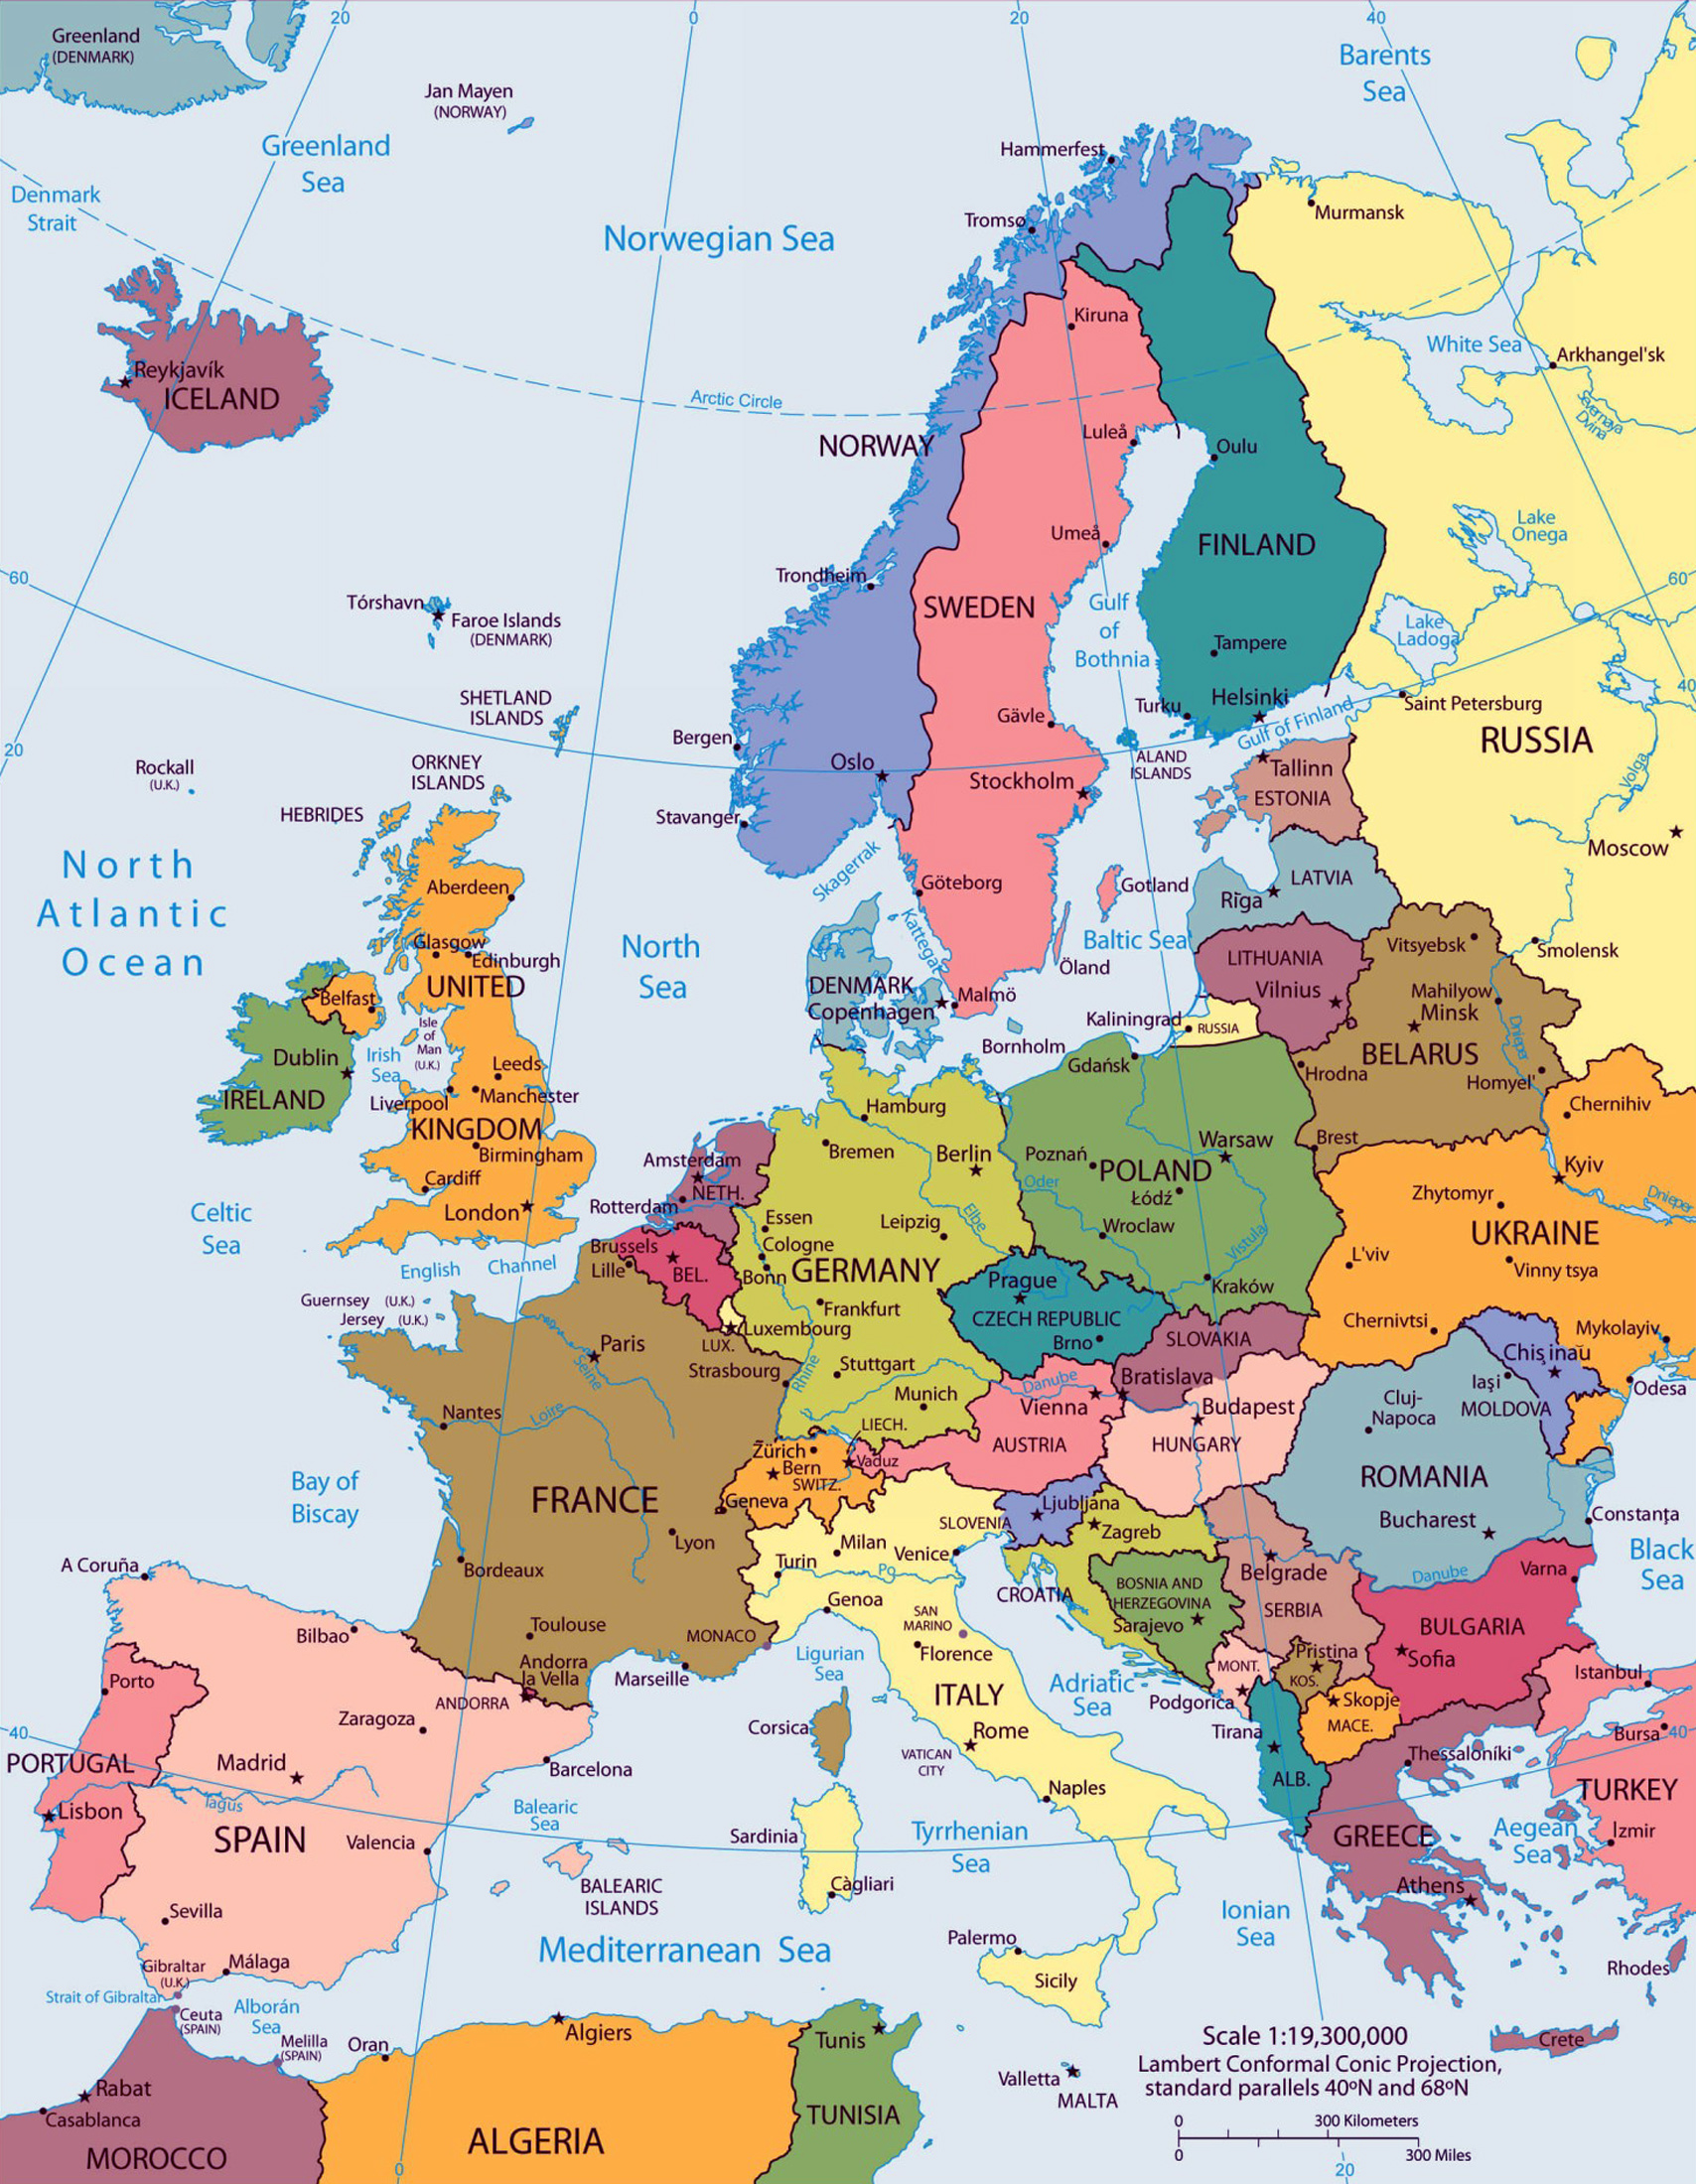 Europe-political-map-of-capital-cities-countries.jpg